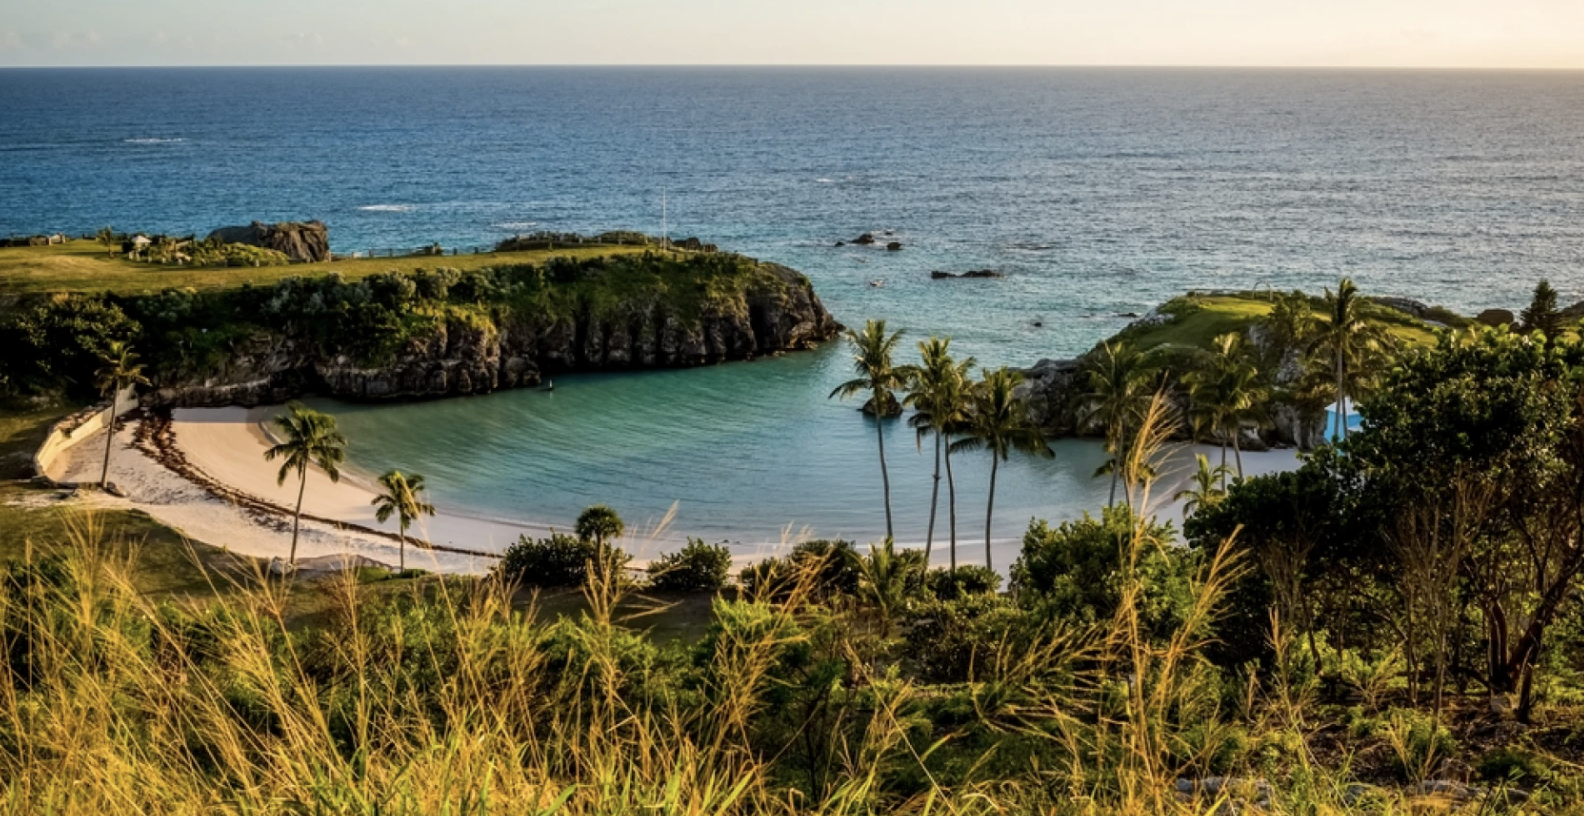 4 Reasons Why Bermuda Should Be Your Next Spring Destination